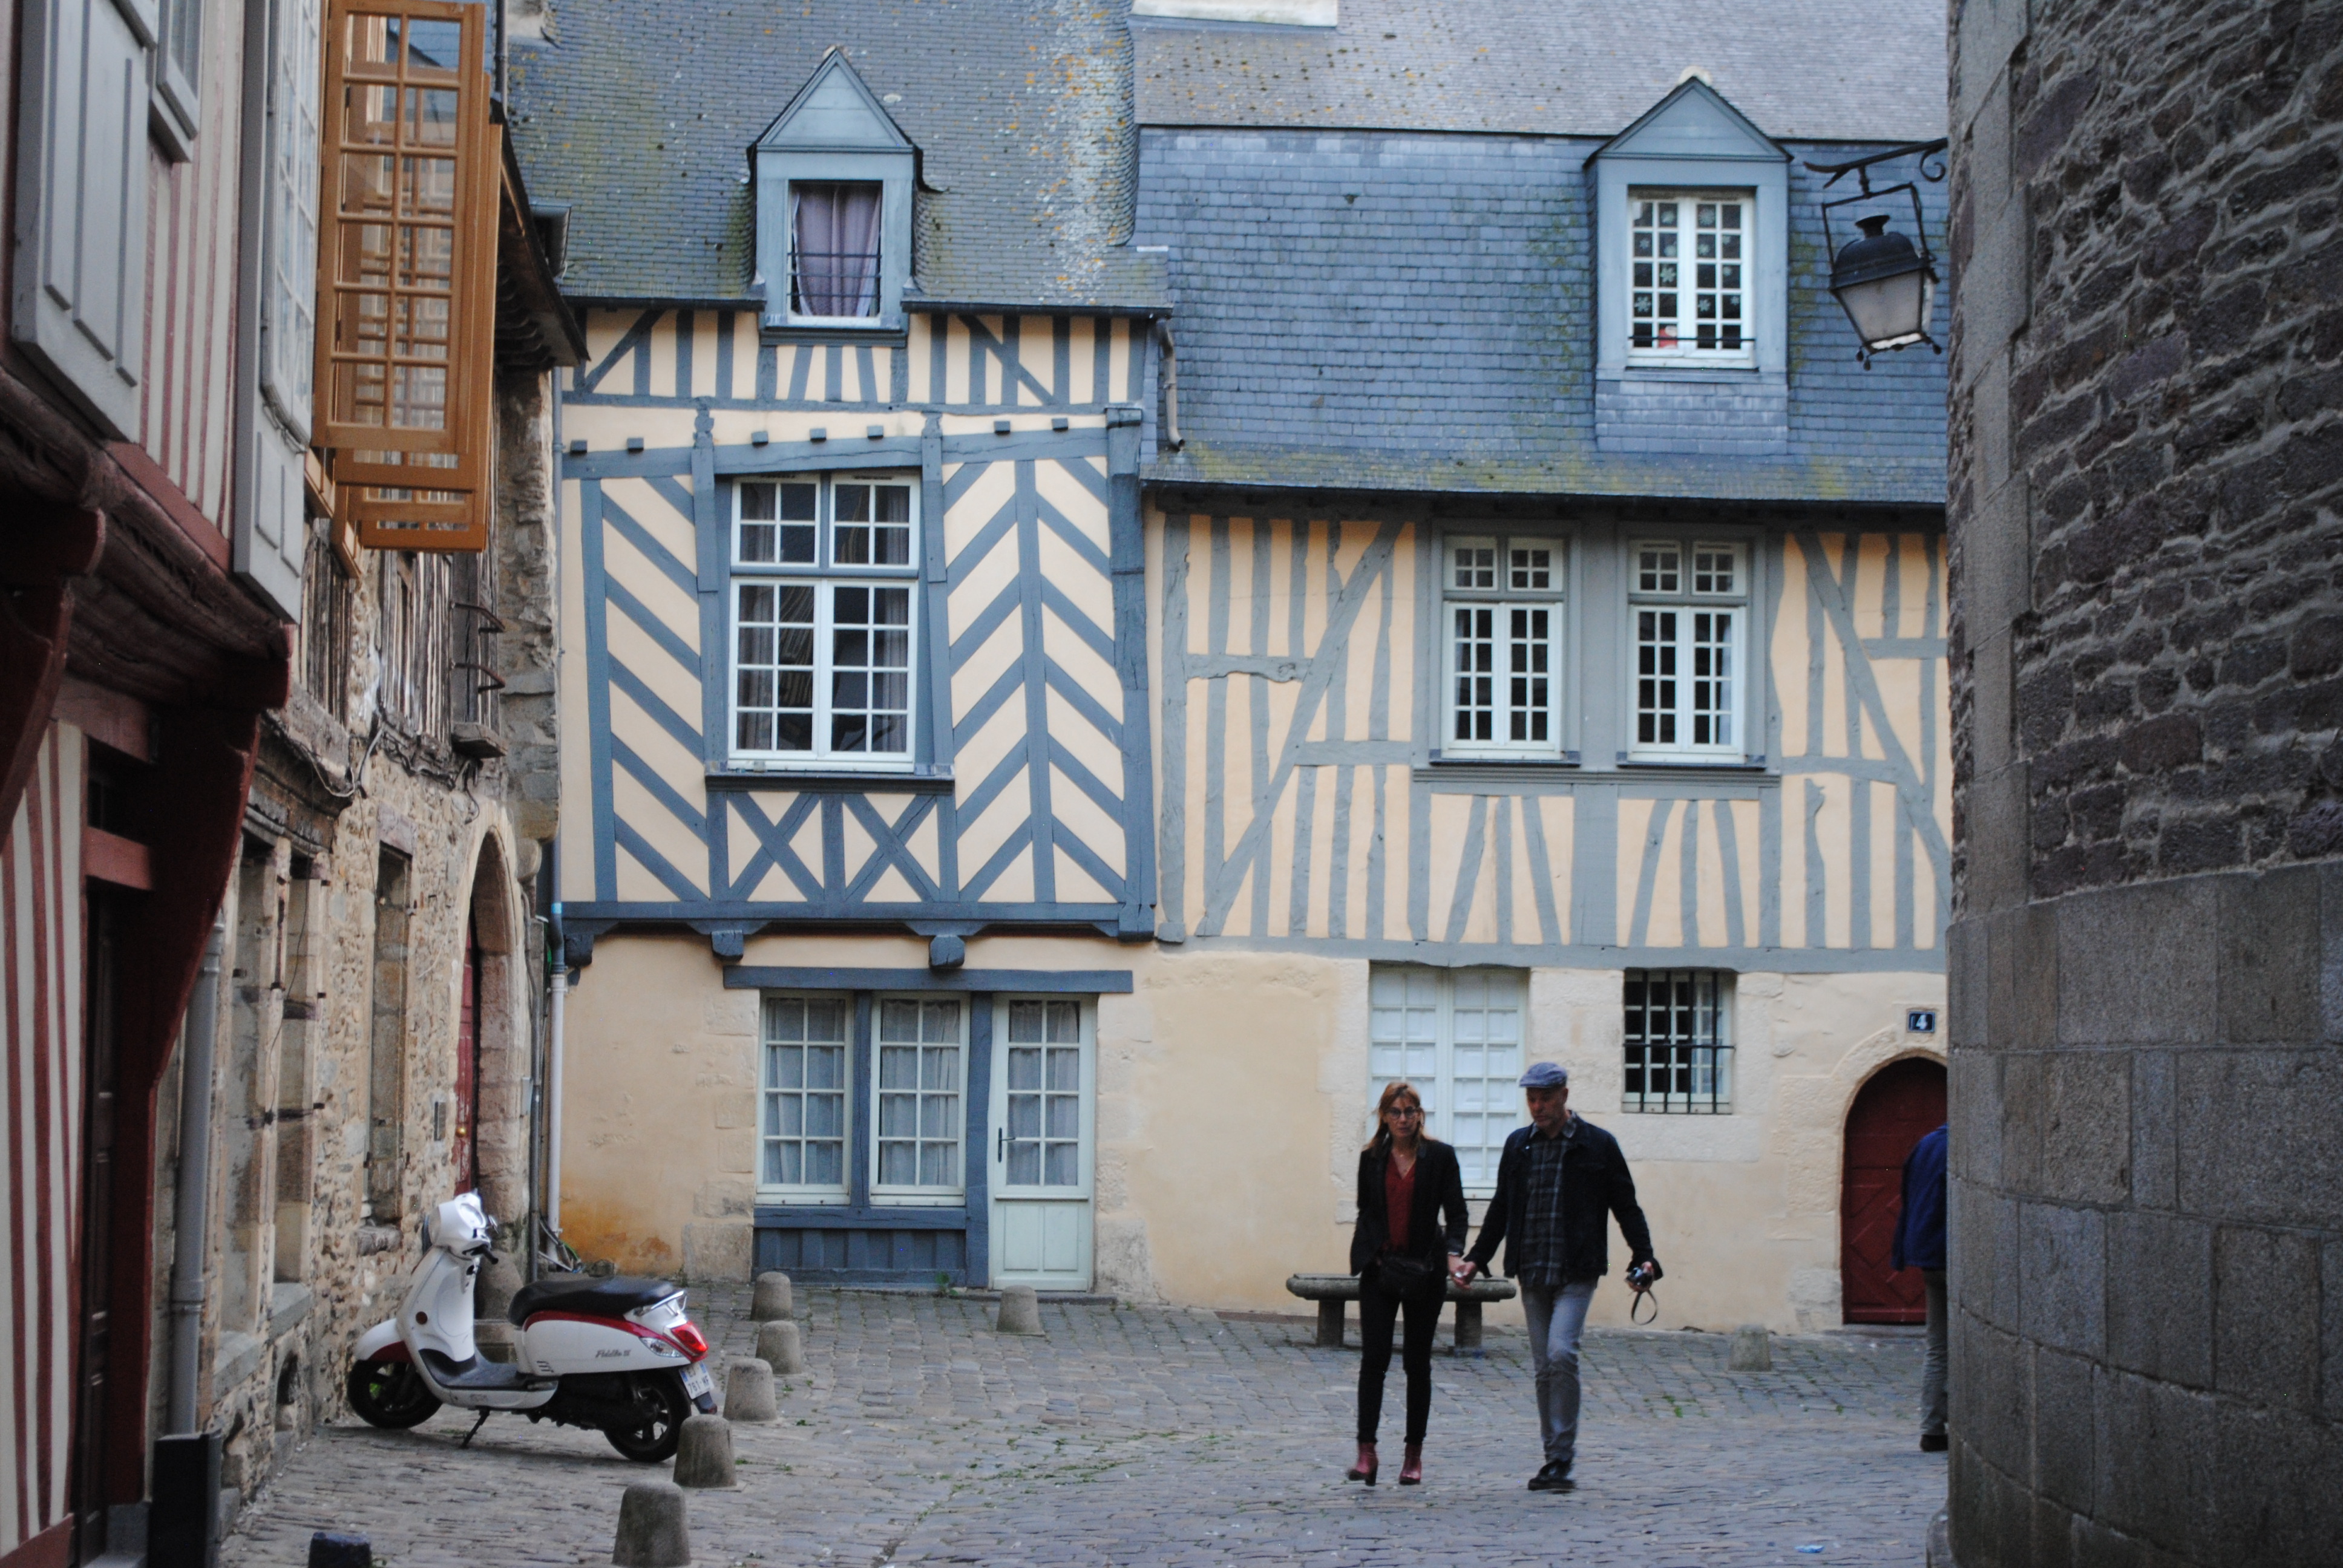 back corner of old houses with decorative blue woodwork on the sides and two people walking nearby